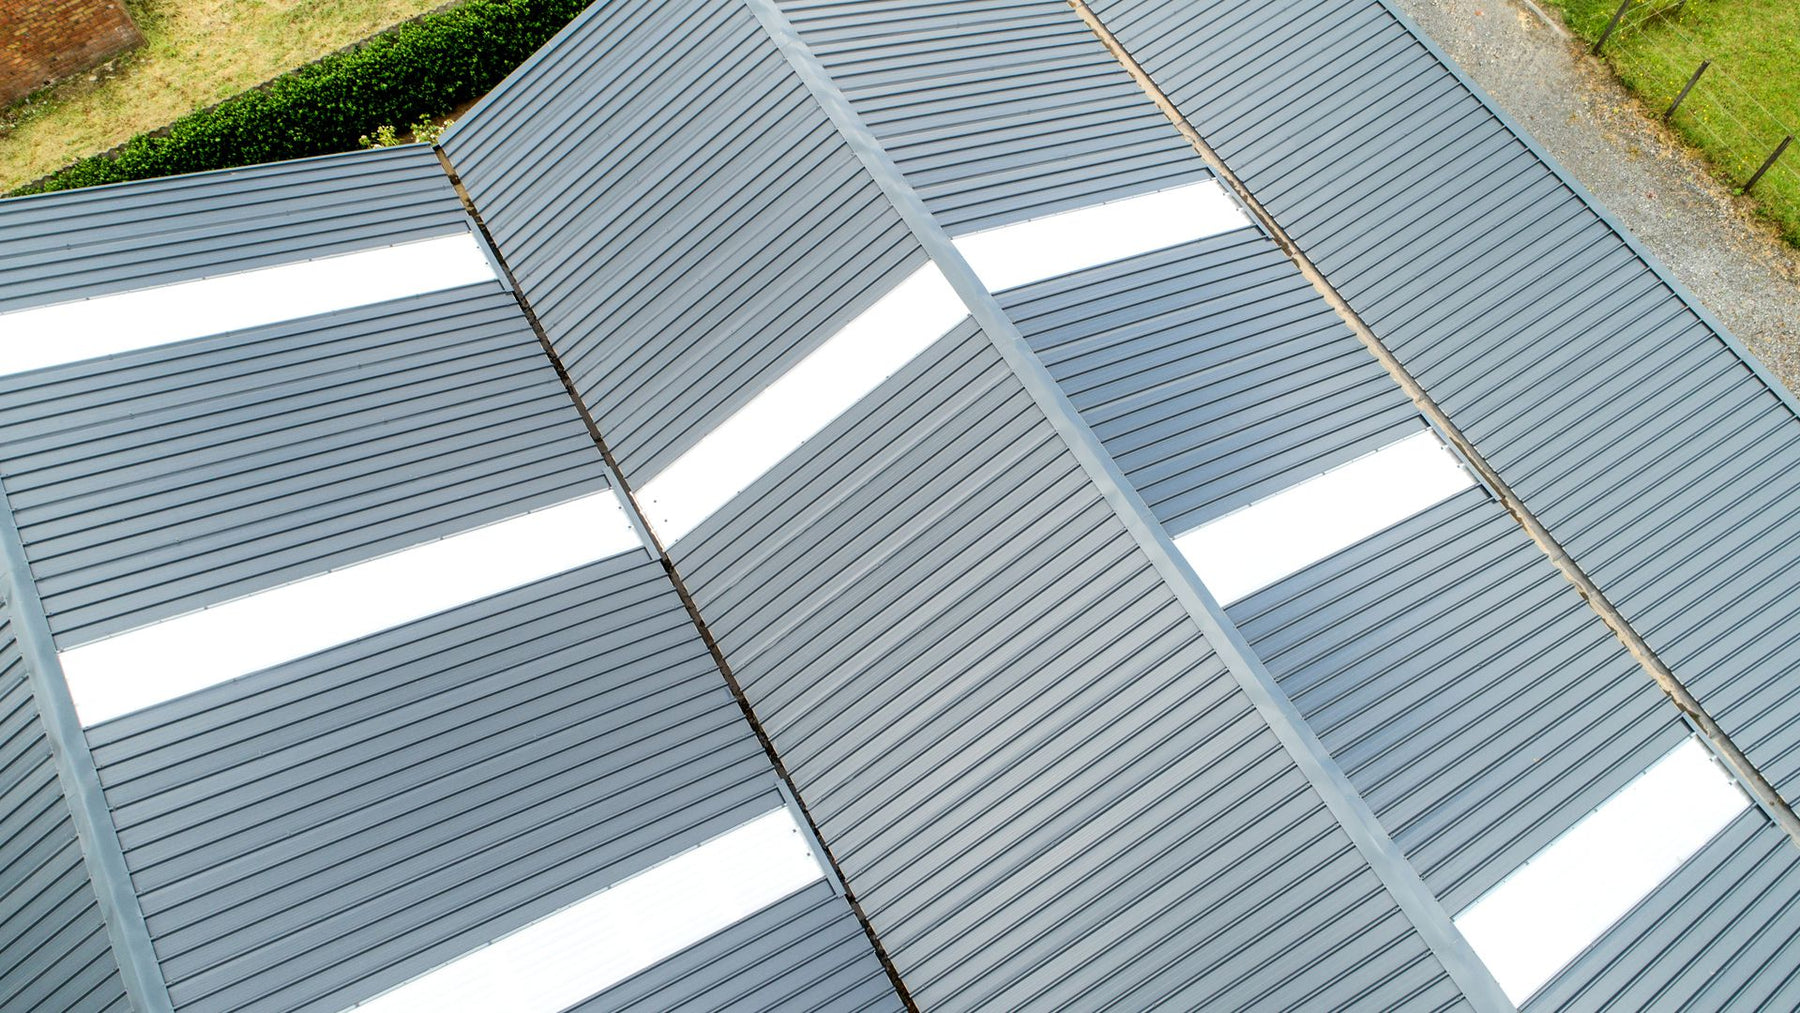 Insulated Roofing Sheets for Temperature Control and Energy Efficiency in Your Building